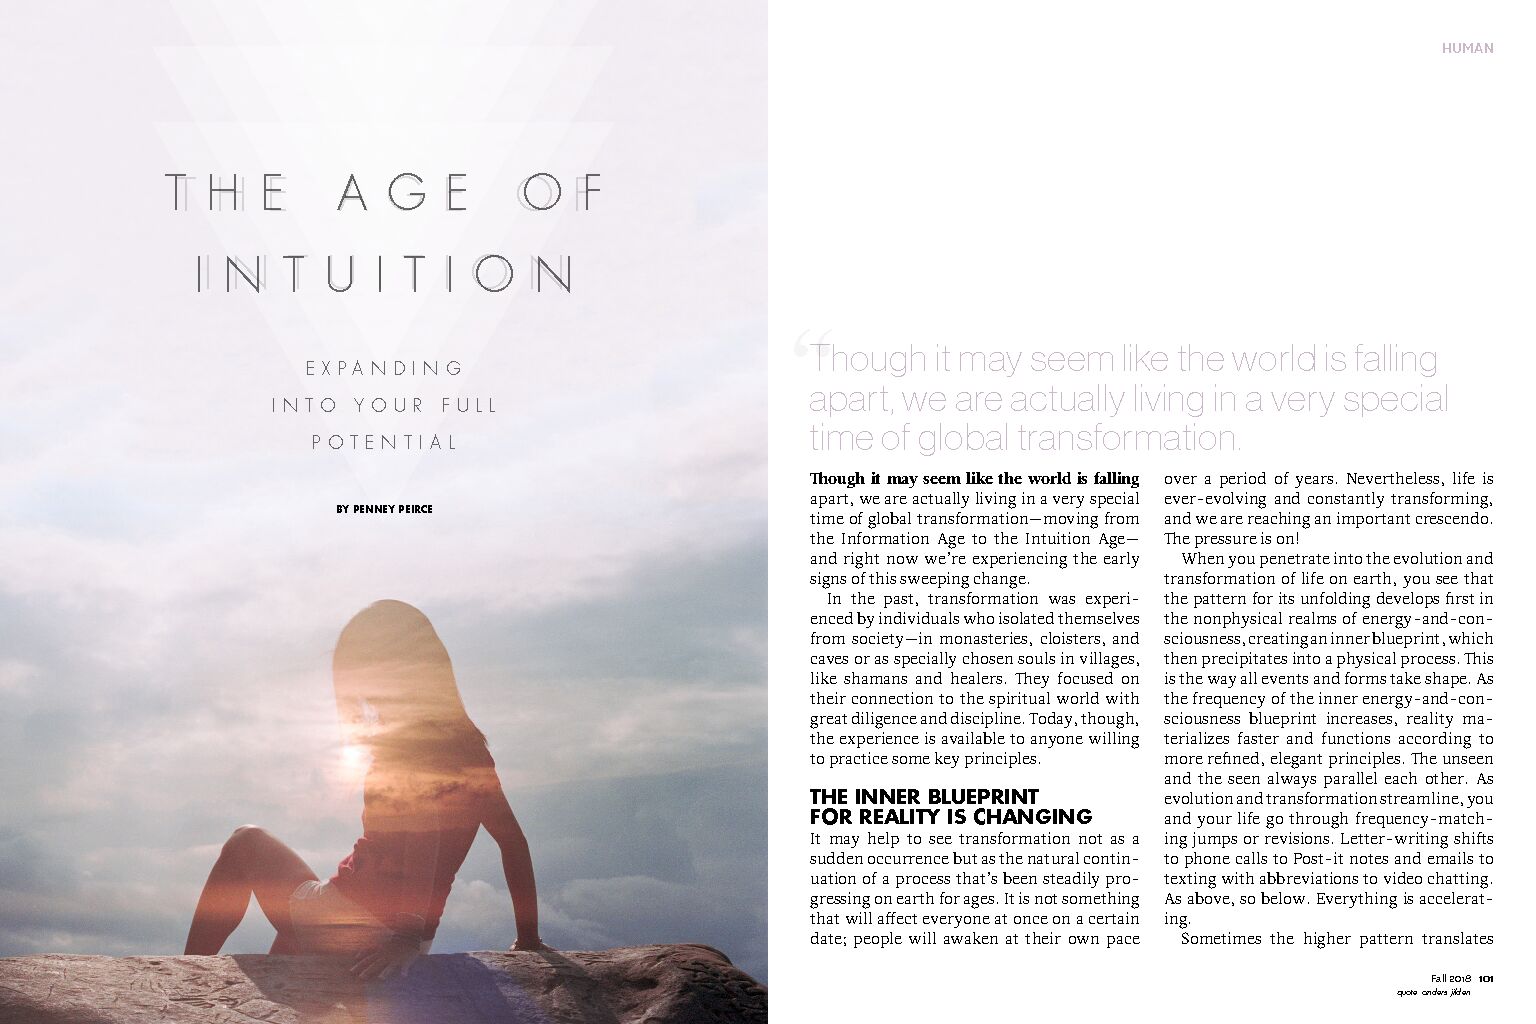 THE AGE OF INTUITION  Penney Peirce